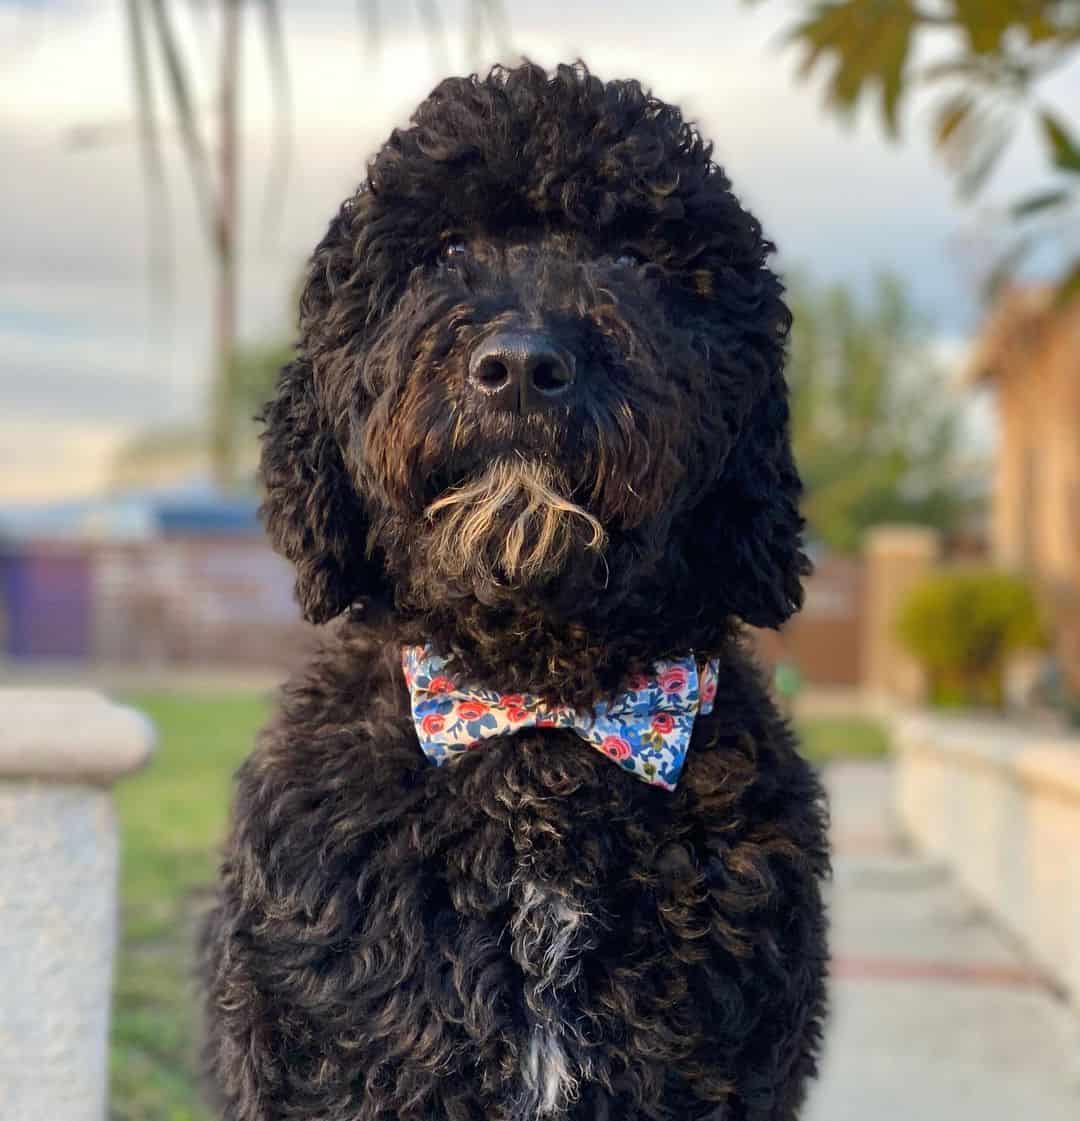 black goldendoodle wearing a bow tie